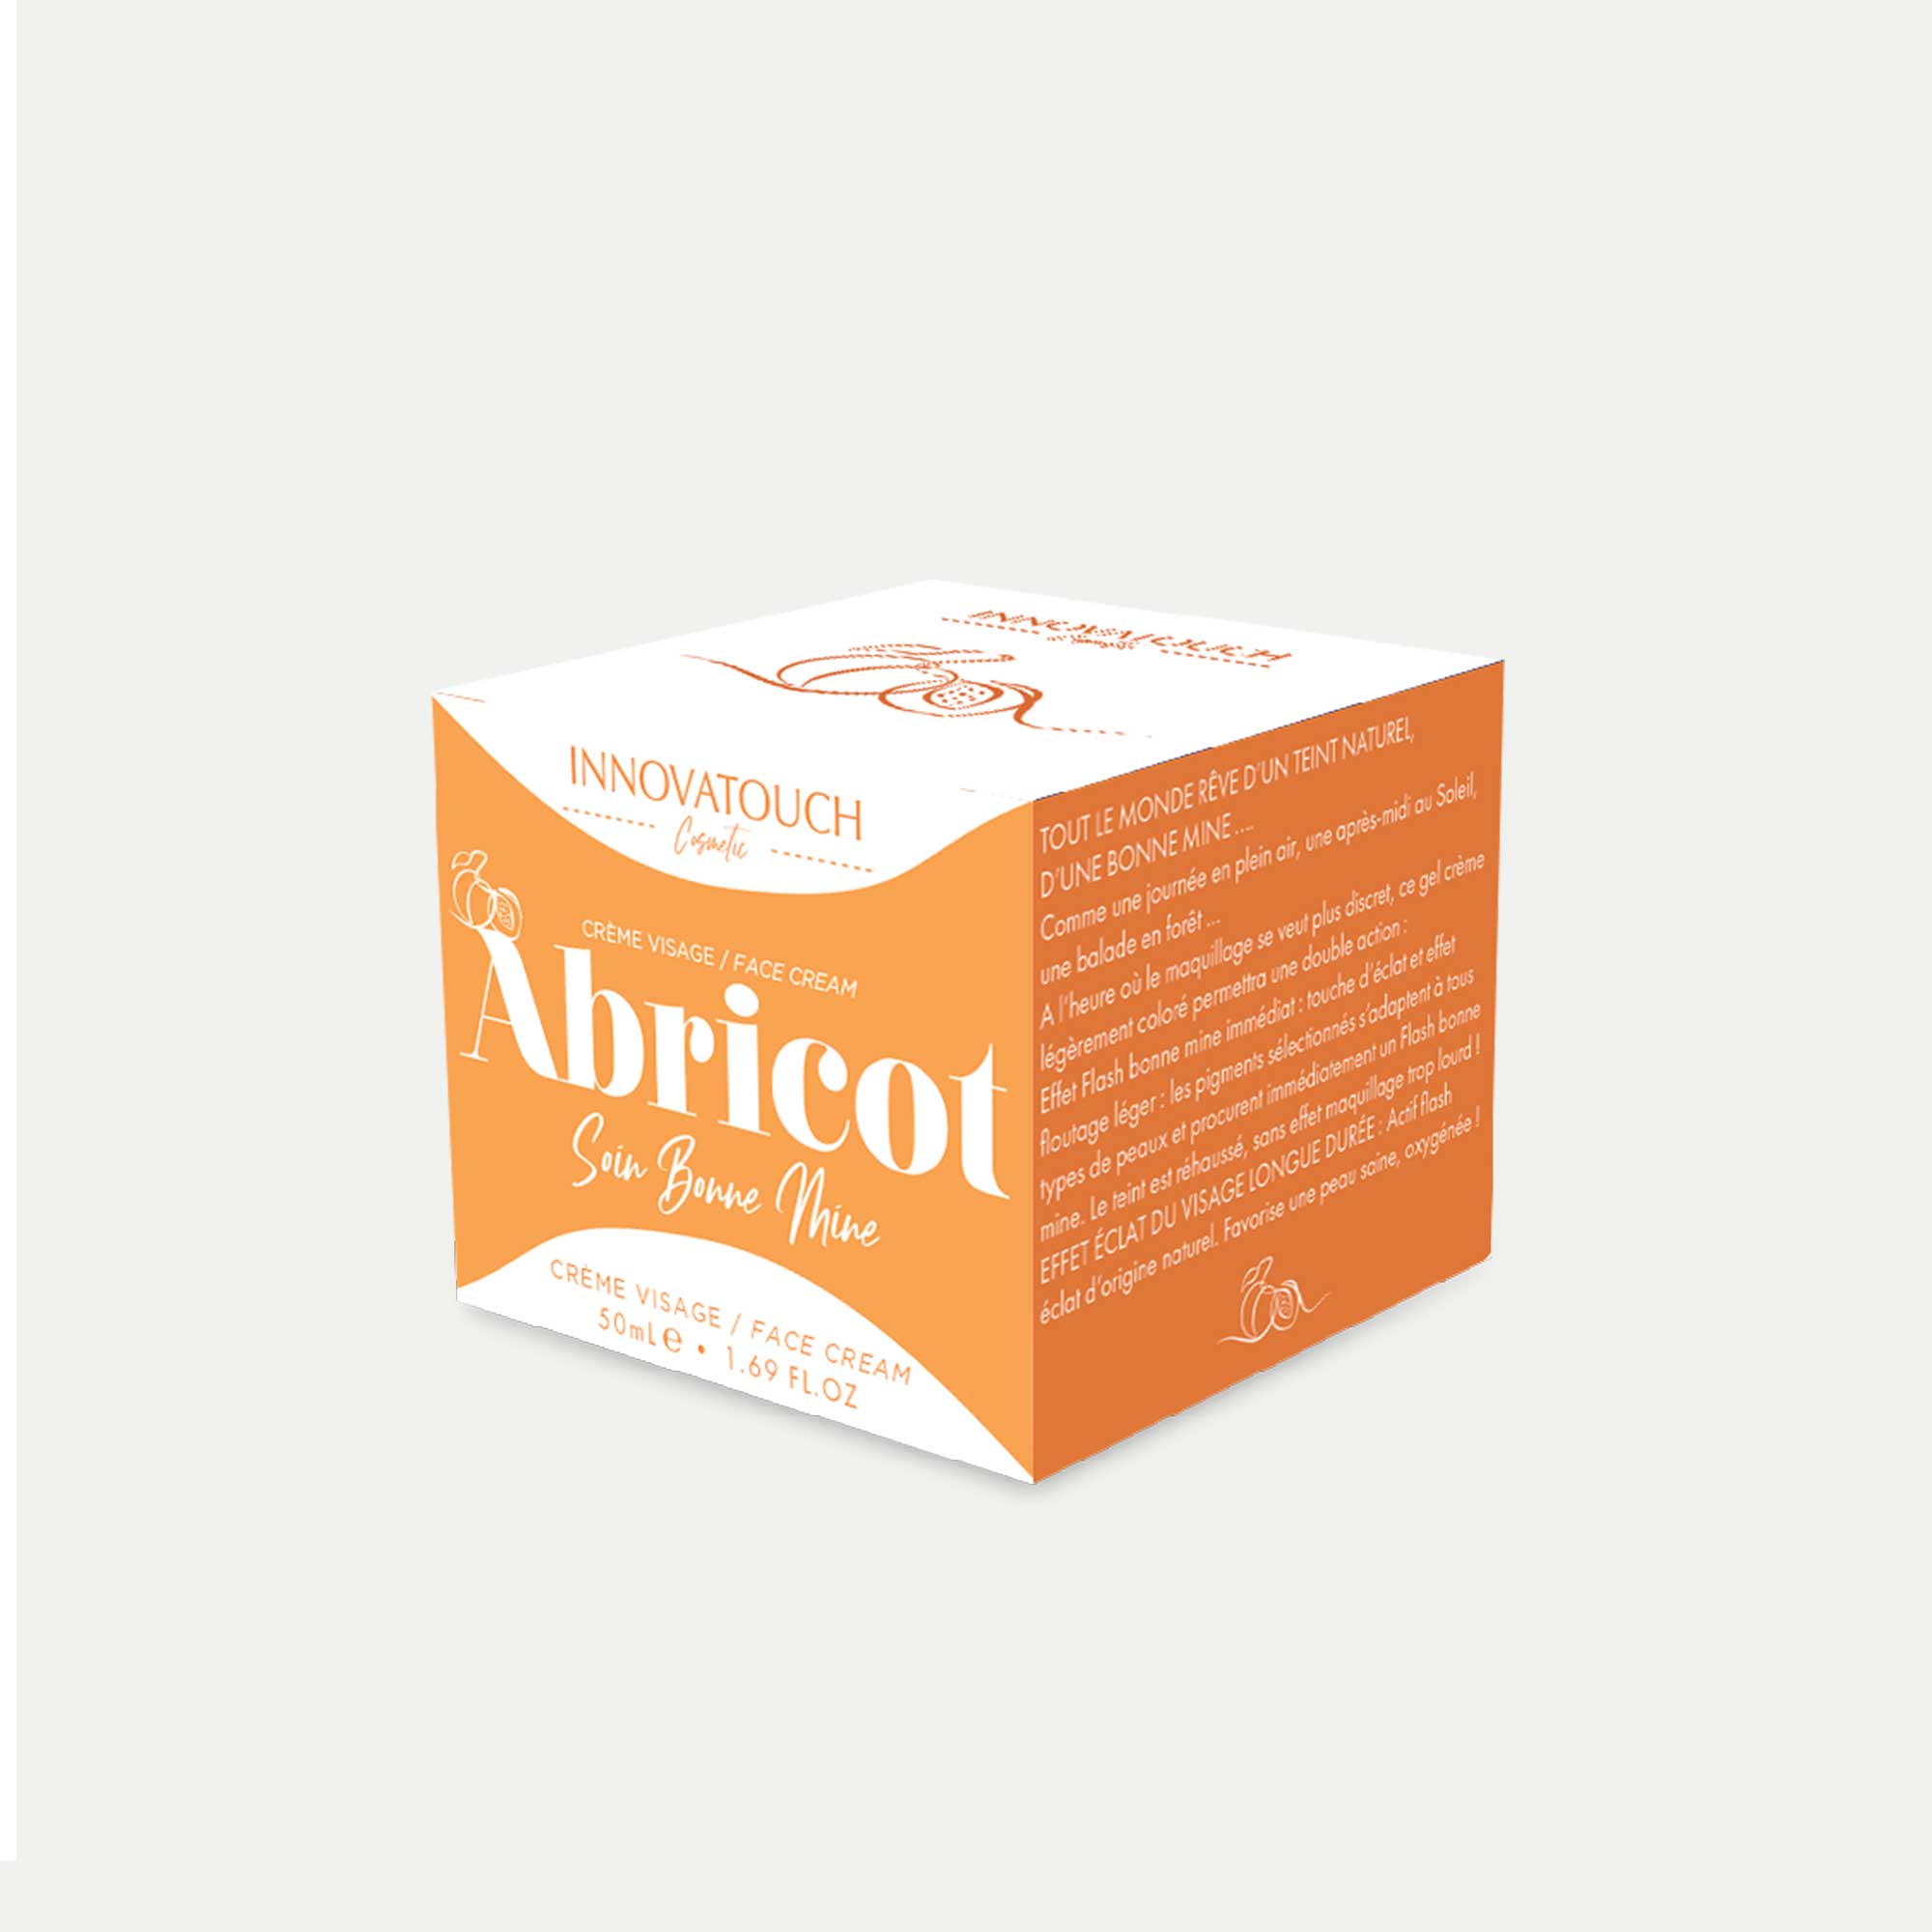 ABRICOT-creme-2-visage-innovatouch-cosmetic